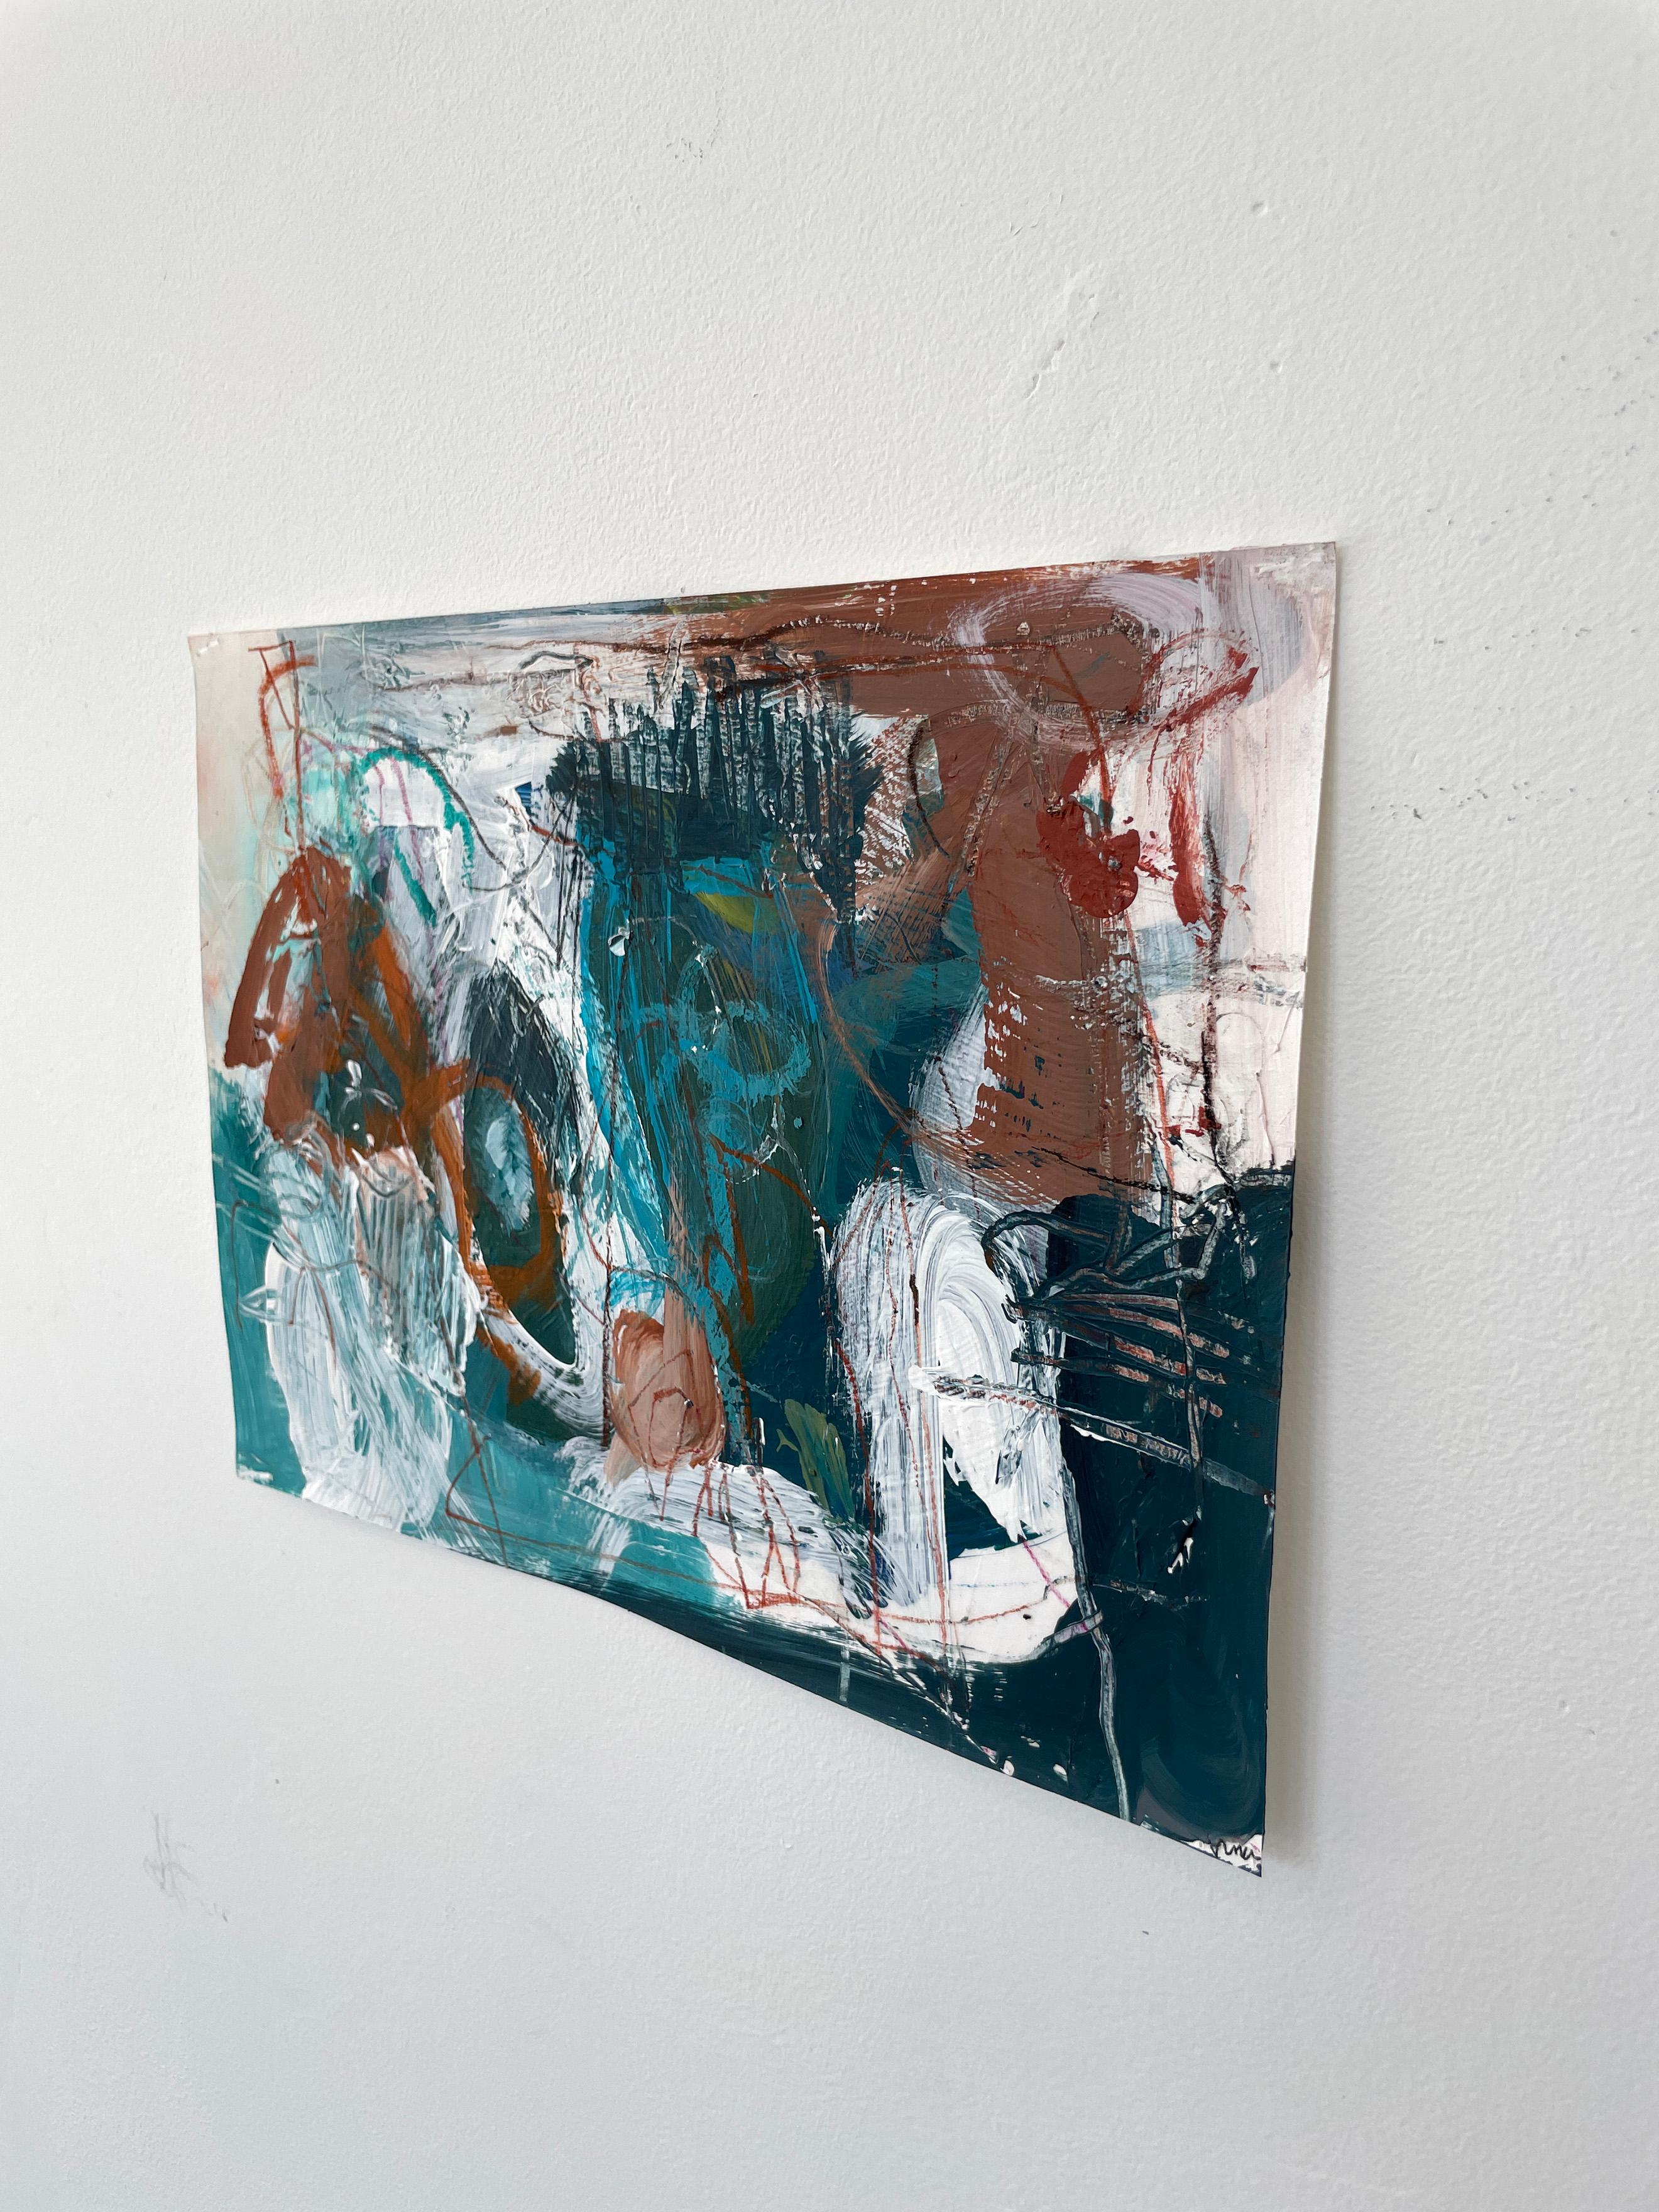 Small Works on Paper, Untitled #17 - Abstract Painting by Stephanie Visser 